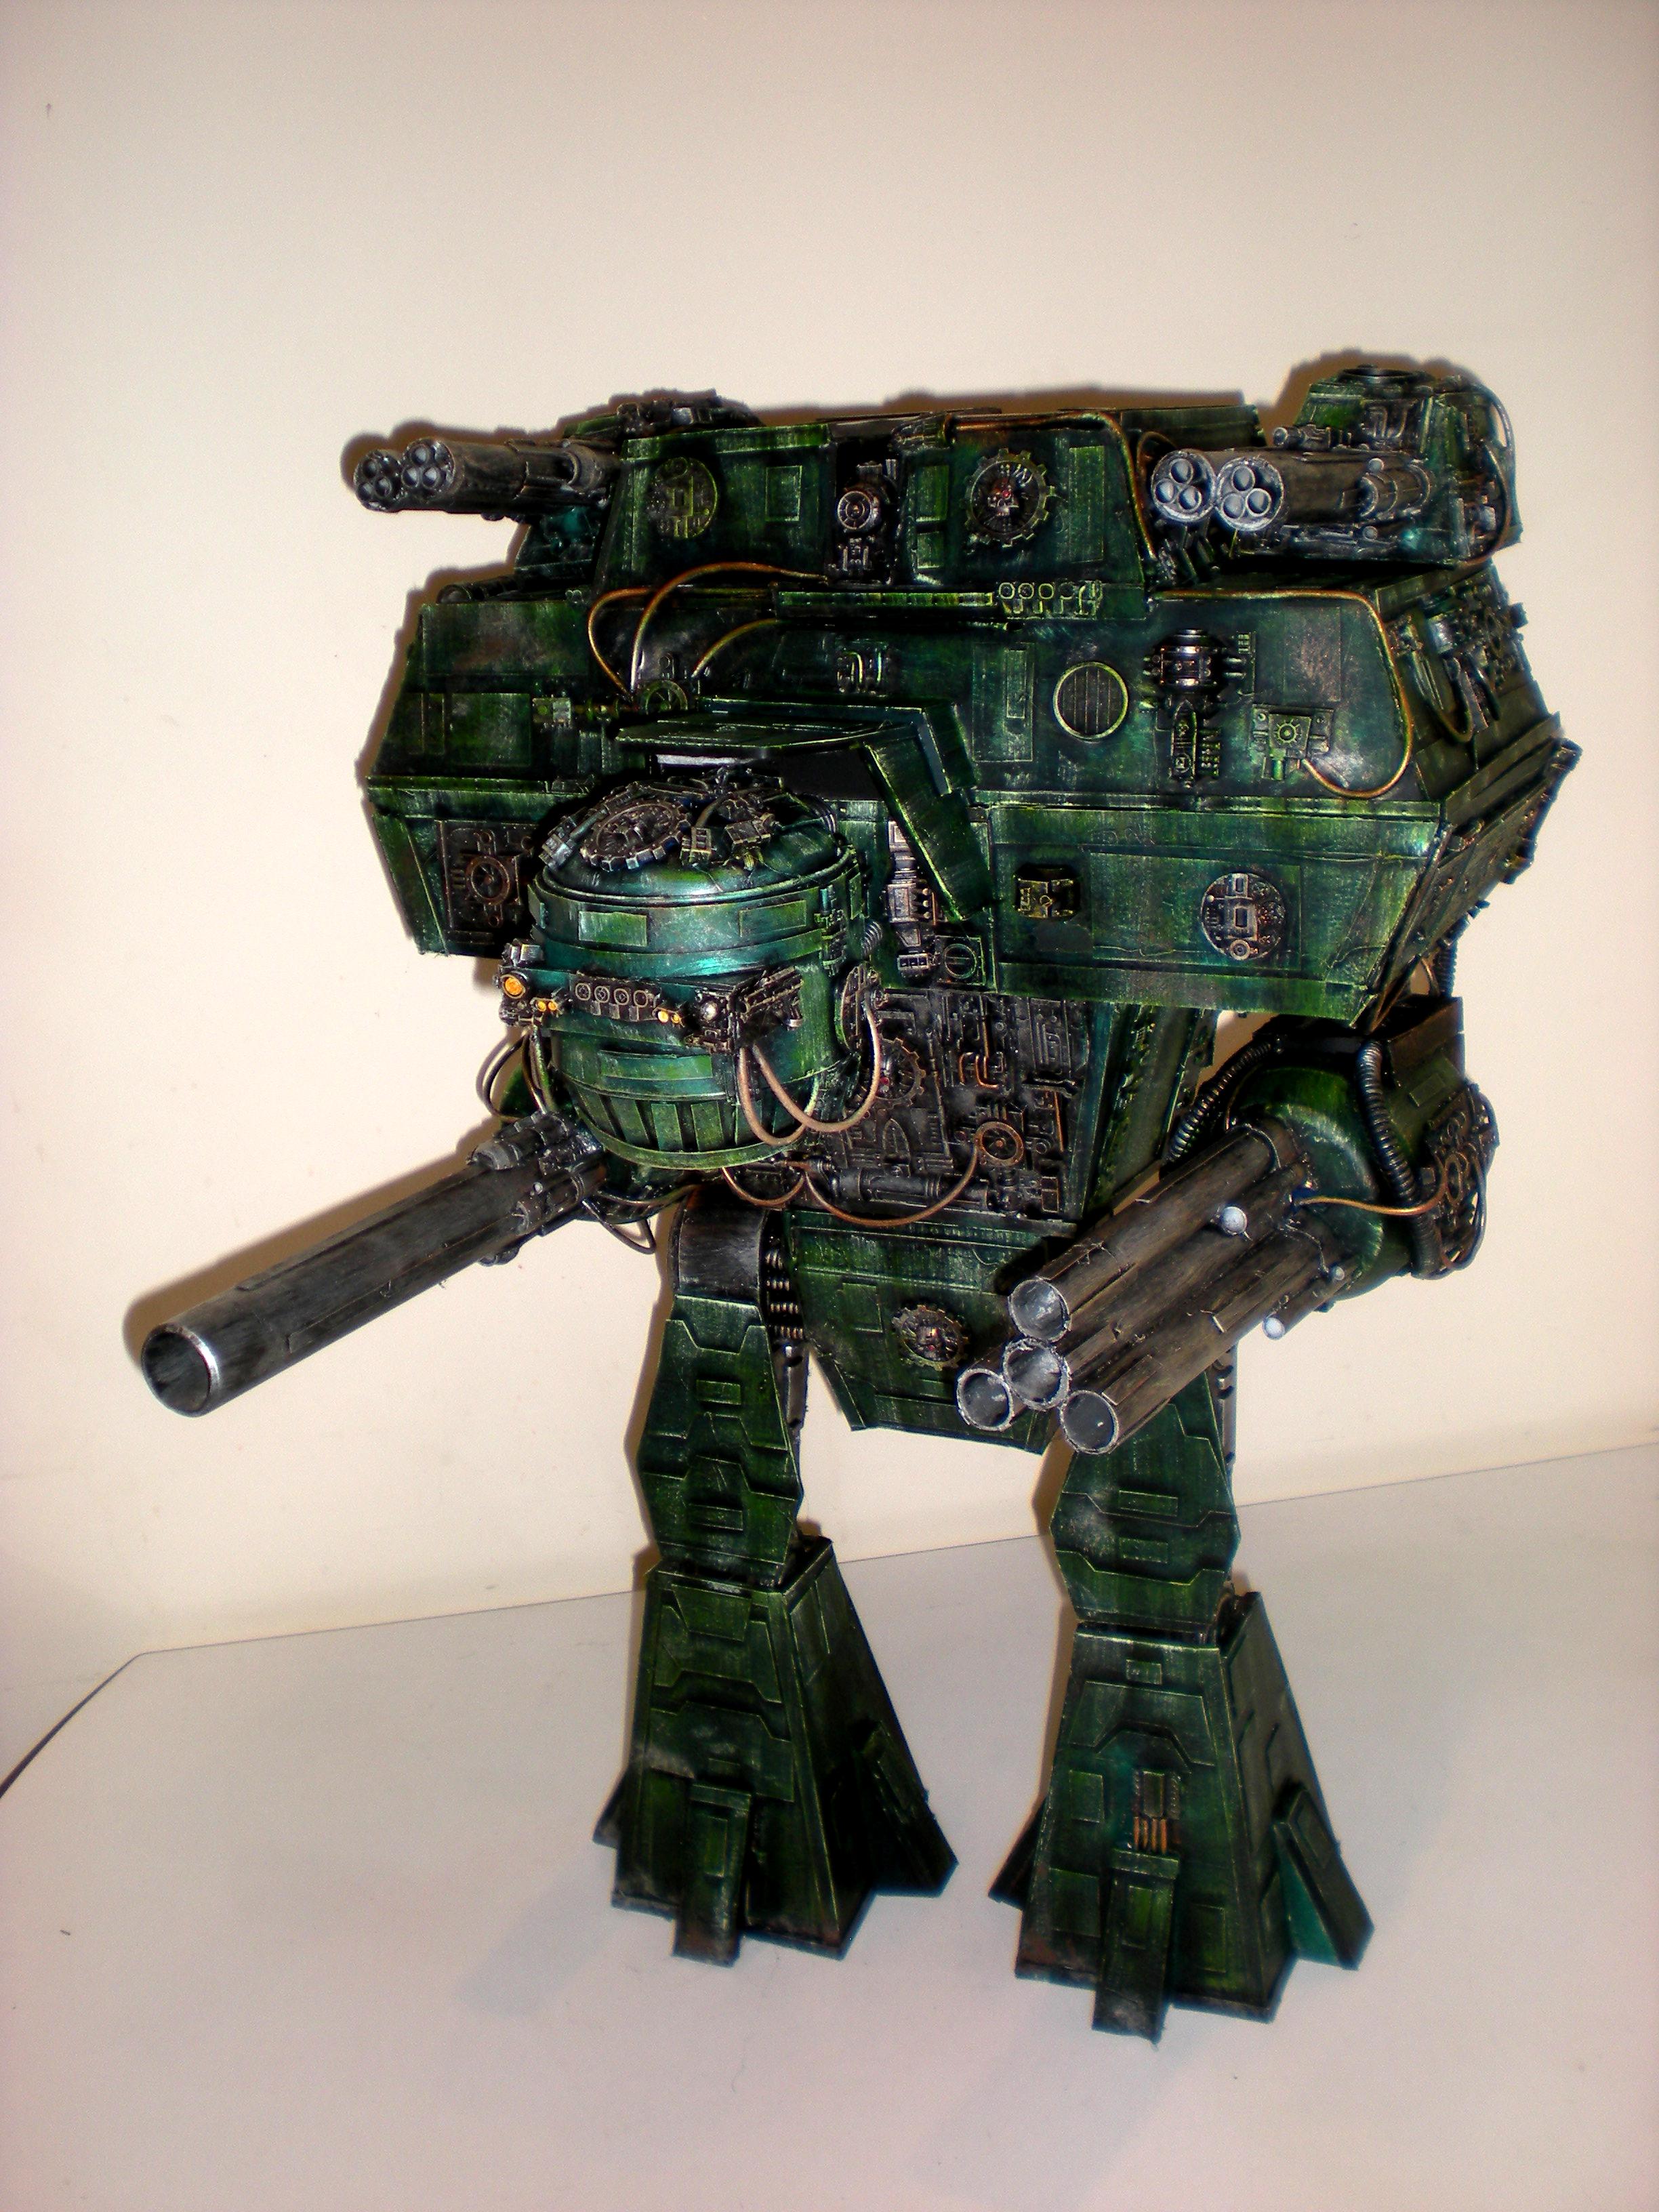 Warlord Titan Space Marine Gian Scratch Built For Sale